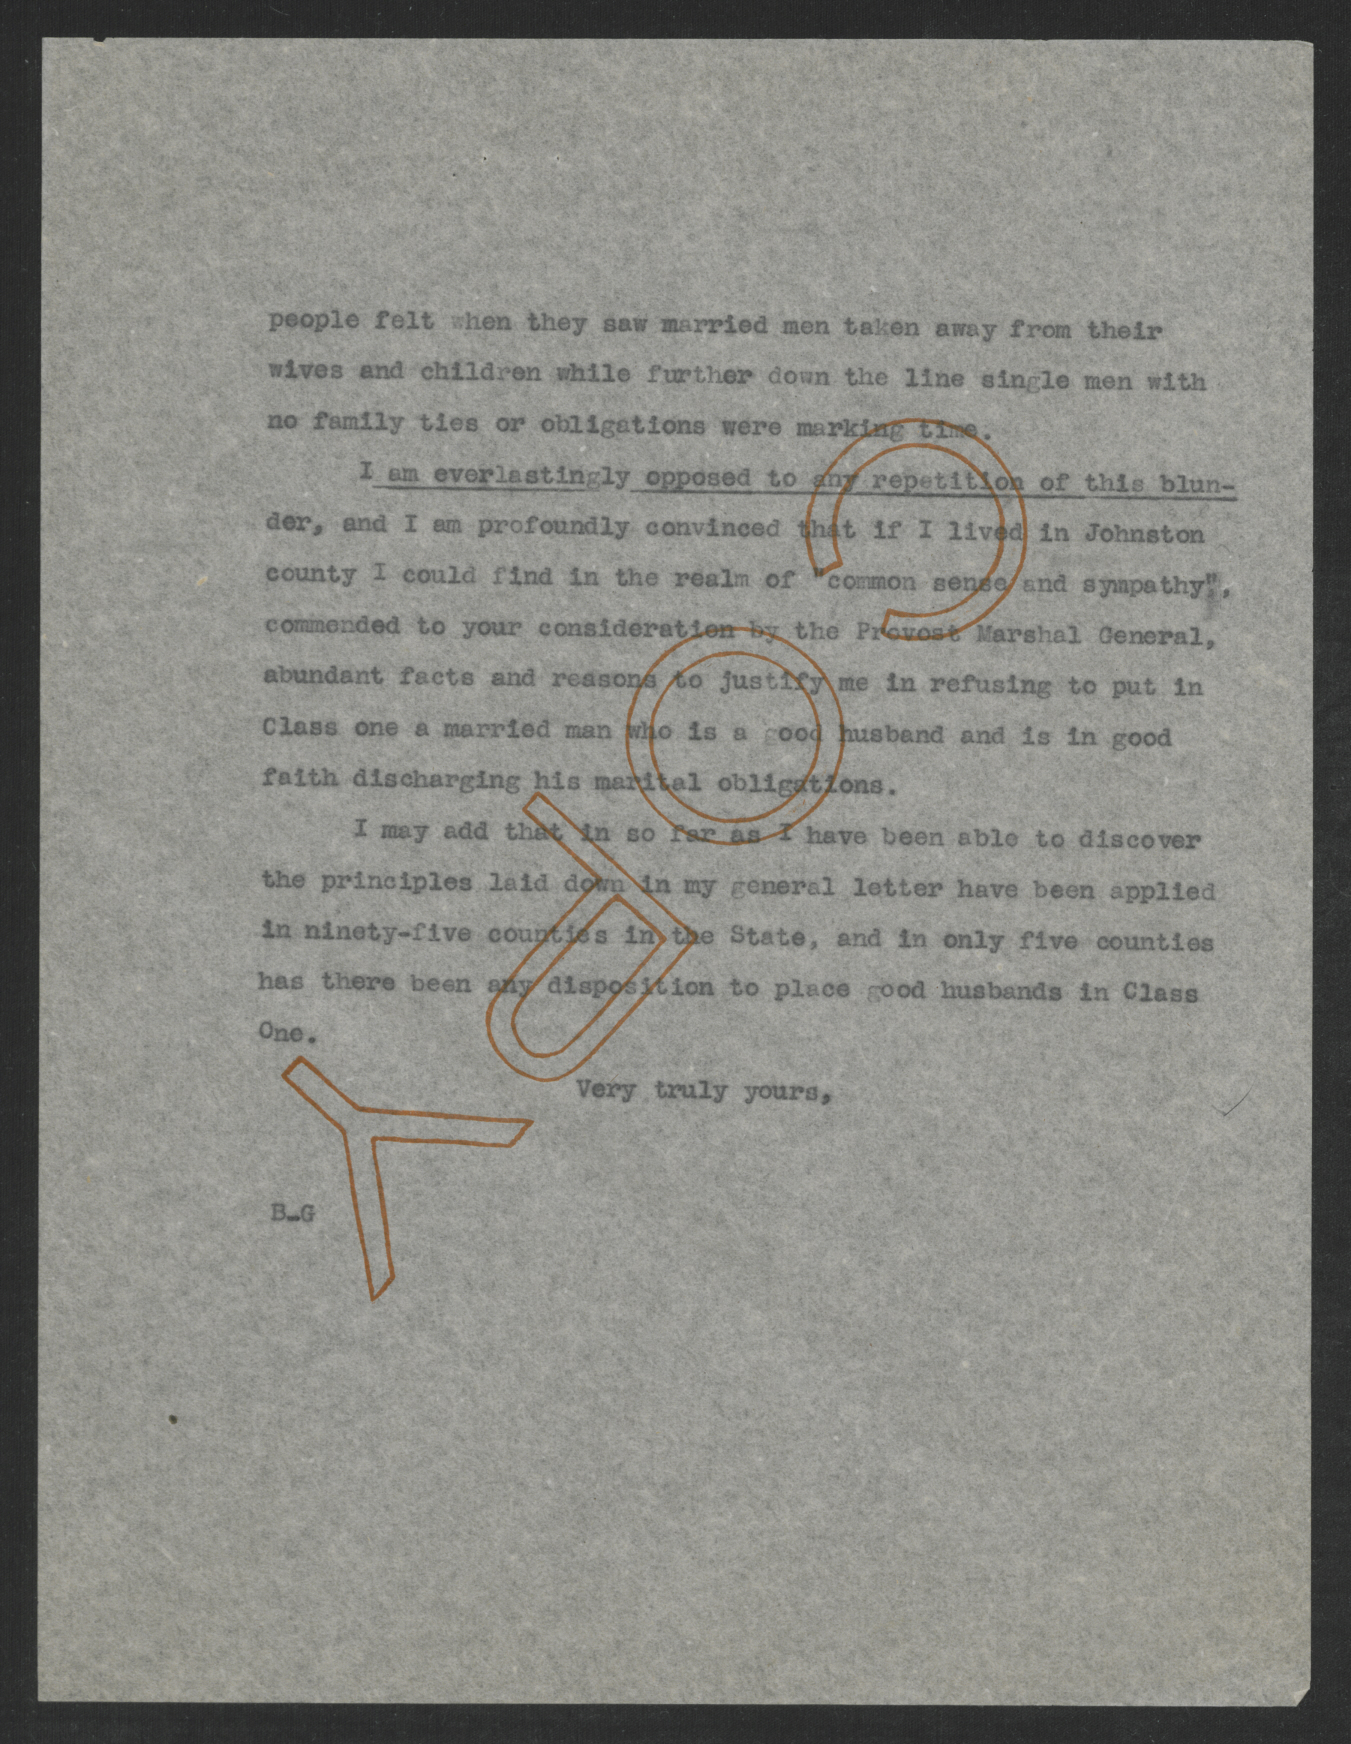 Letter from Thomas W. Bickett to Lacy D. Wharton, February 15, 1918, page 2